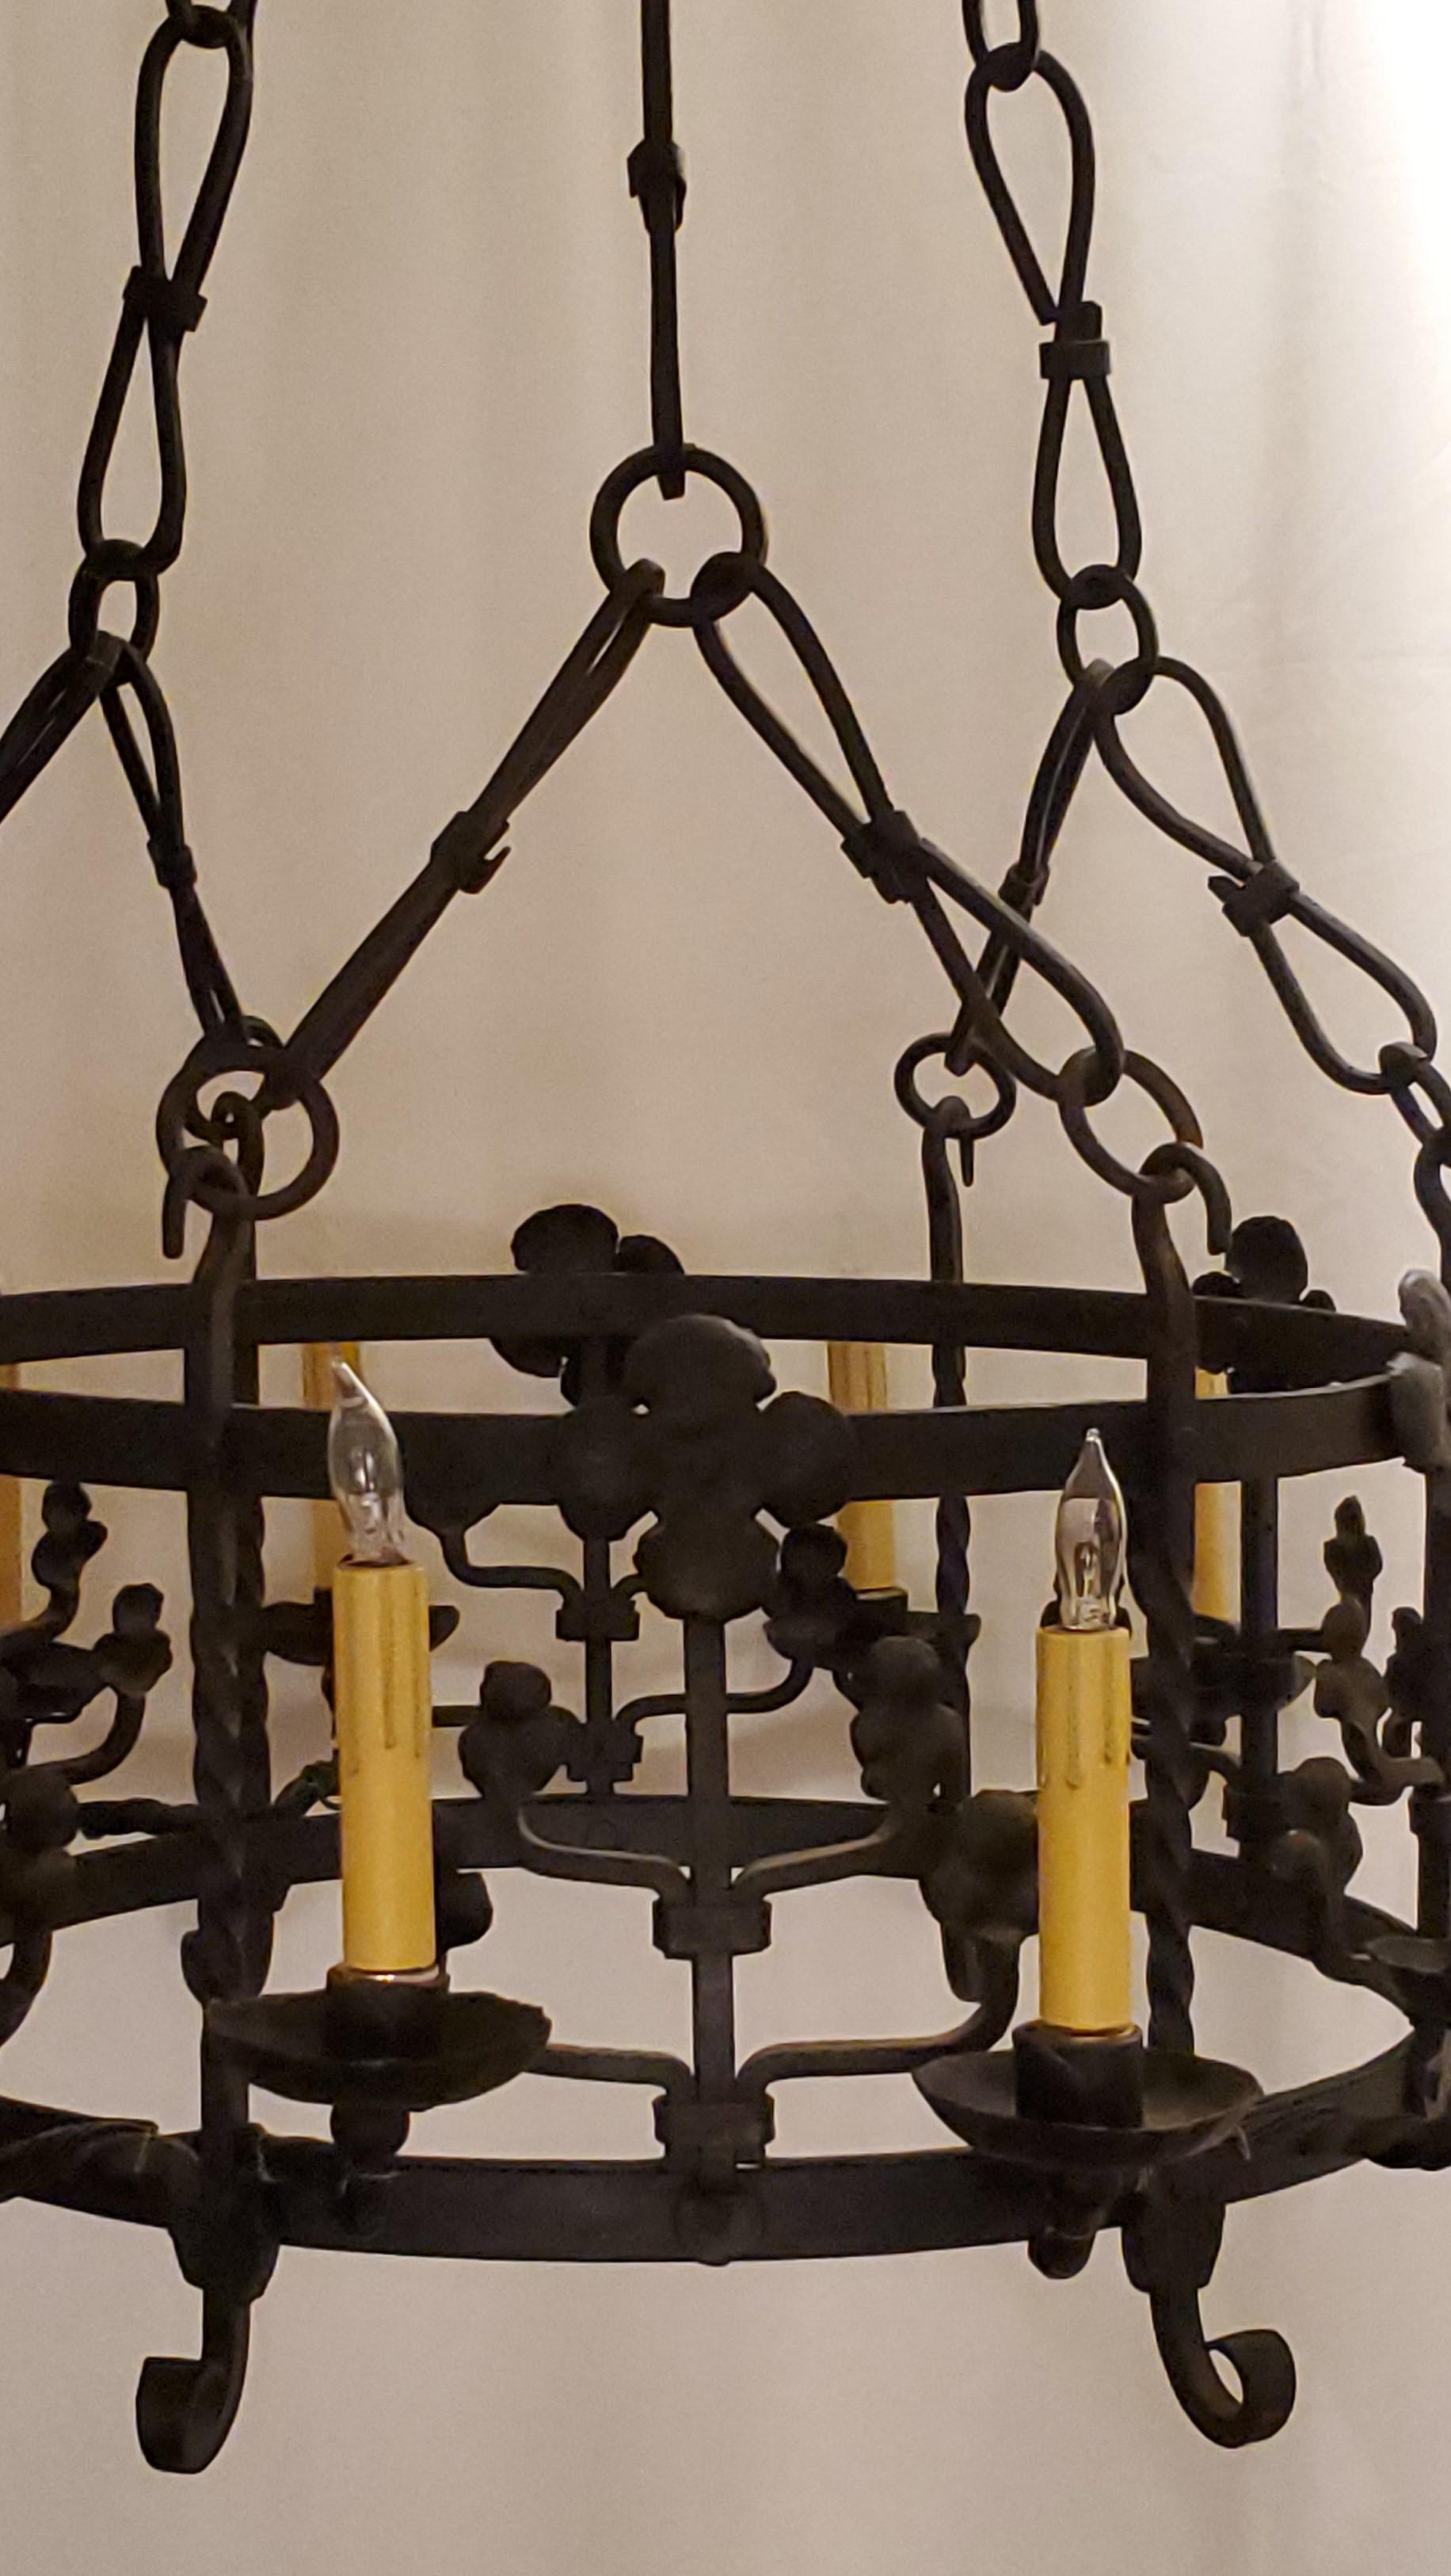 Antique French Wrought Iron 12-Light Chandelier, Circa 1890's-1900.
Handsome fixture from the turn of the 20th century.